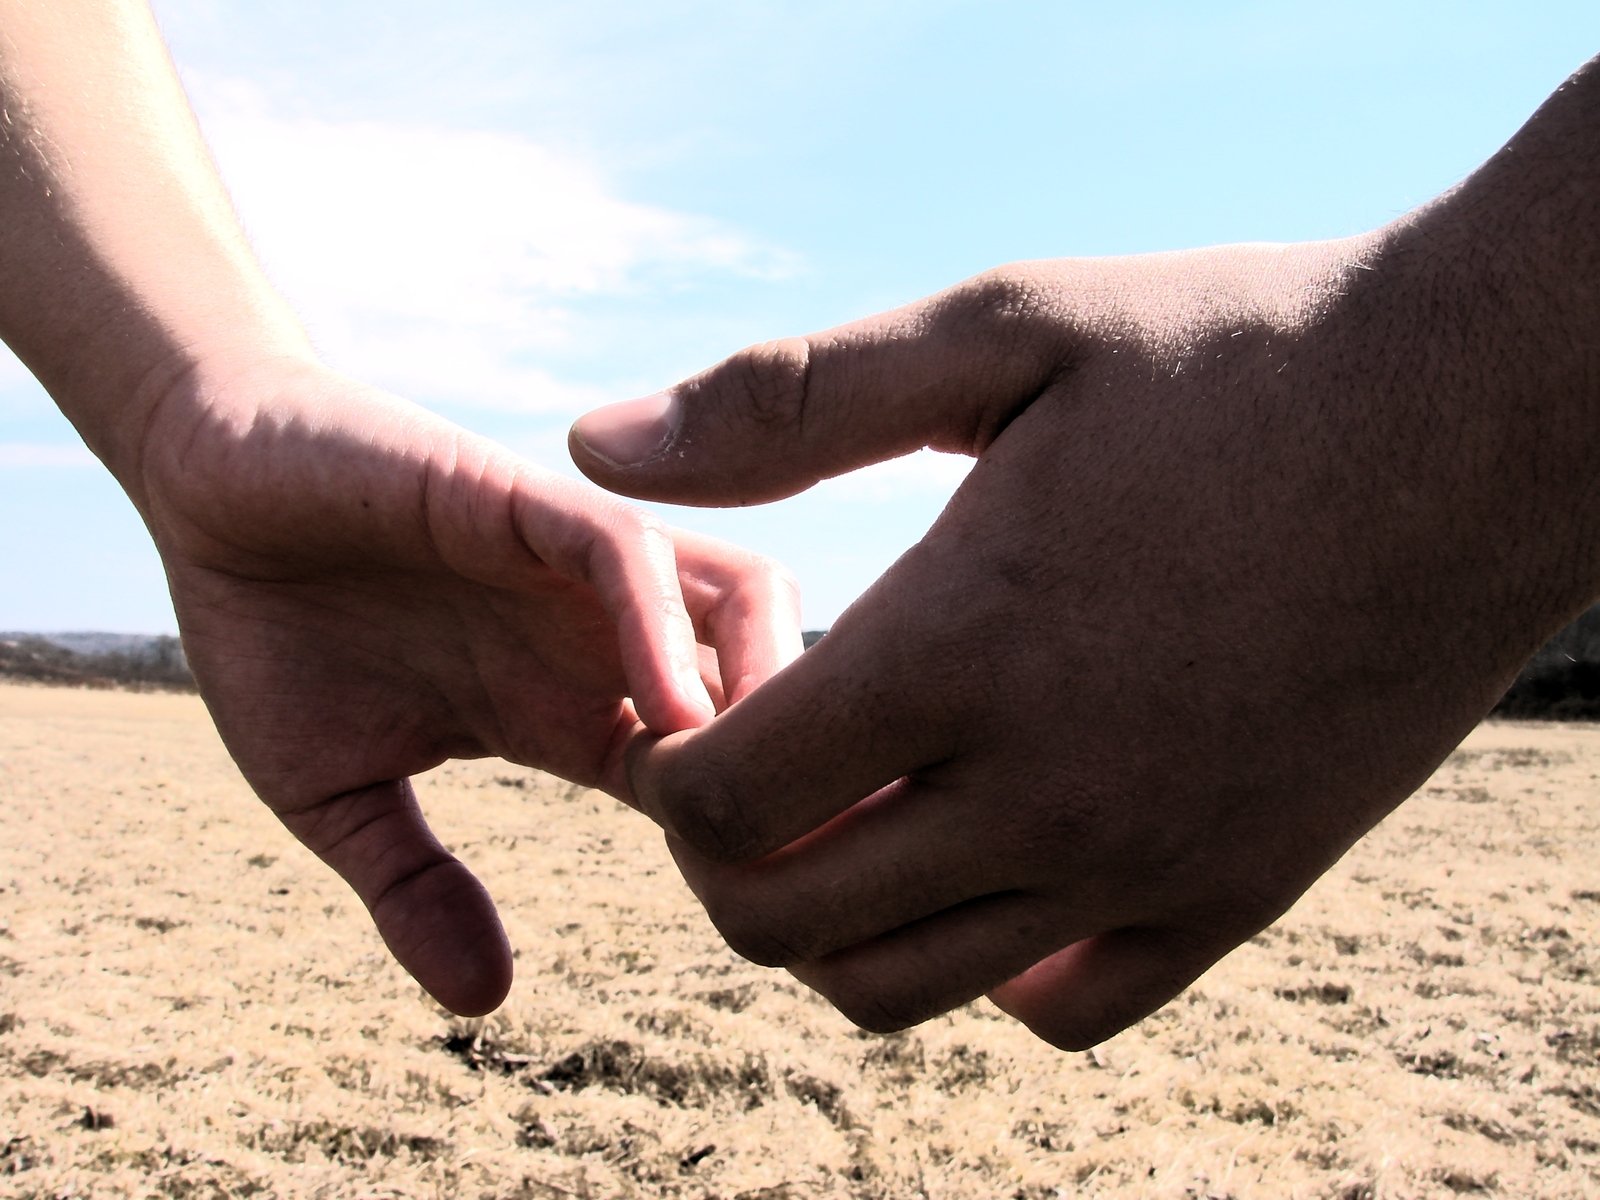 two hands touching each other in the middle of a field